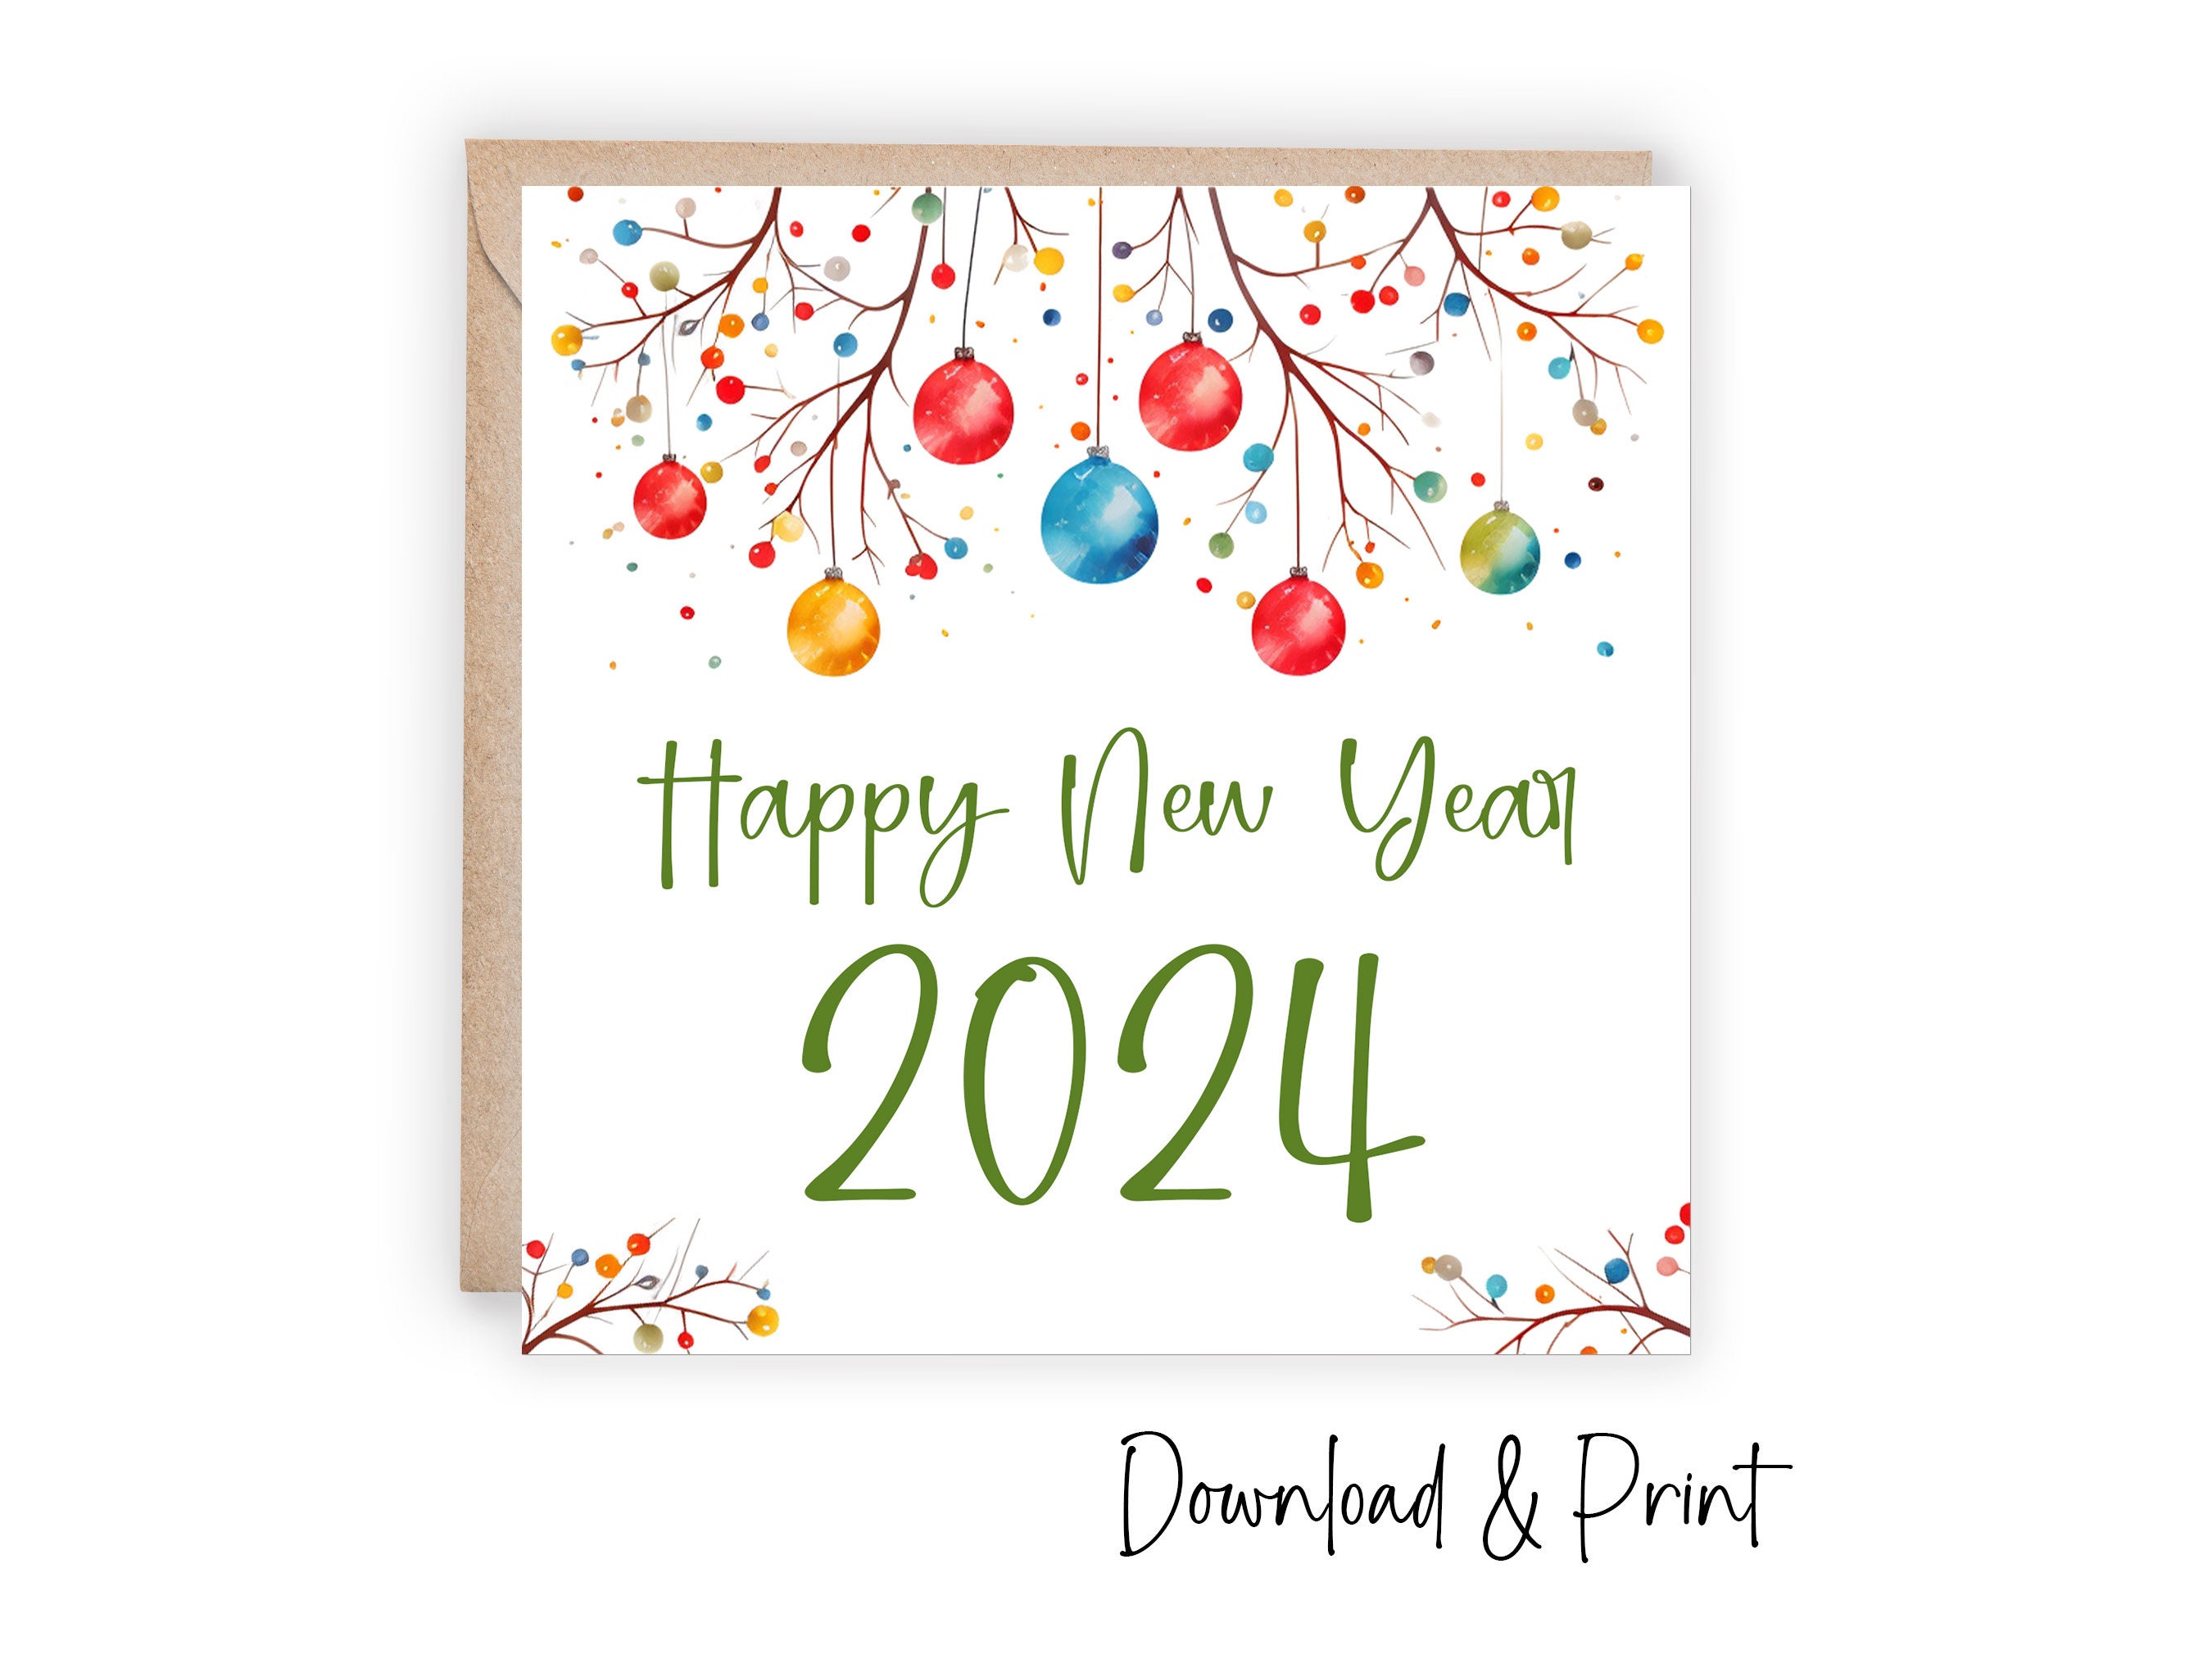 * DIGITAL DOWNLOAD * CARDS and Inspiration - January 2024